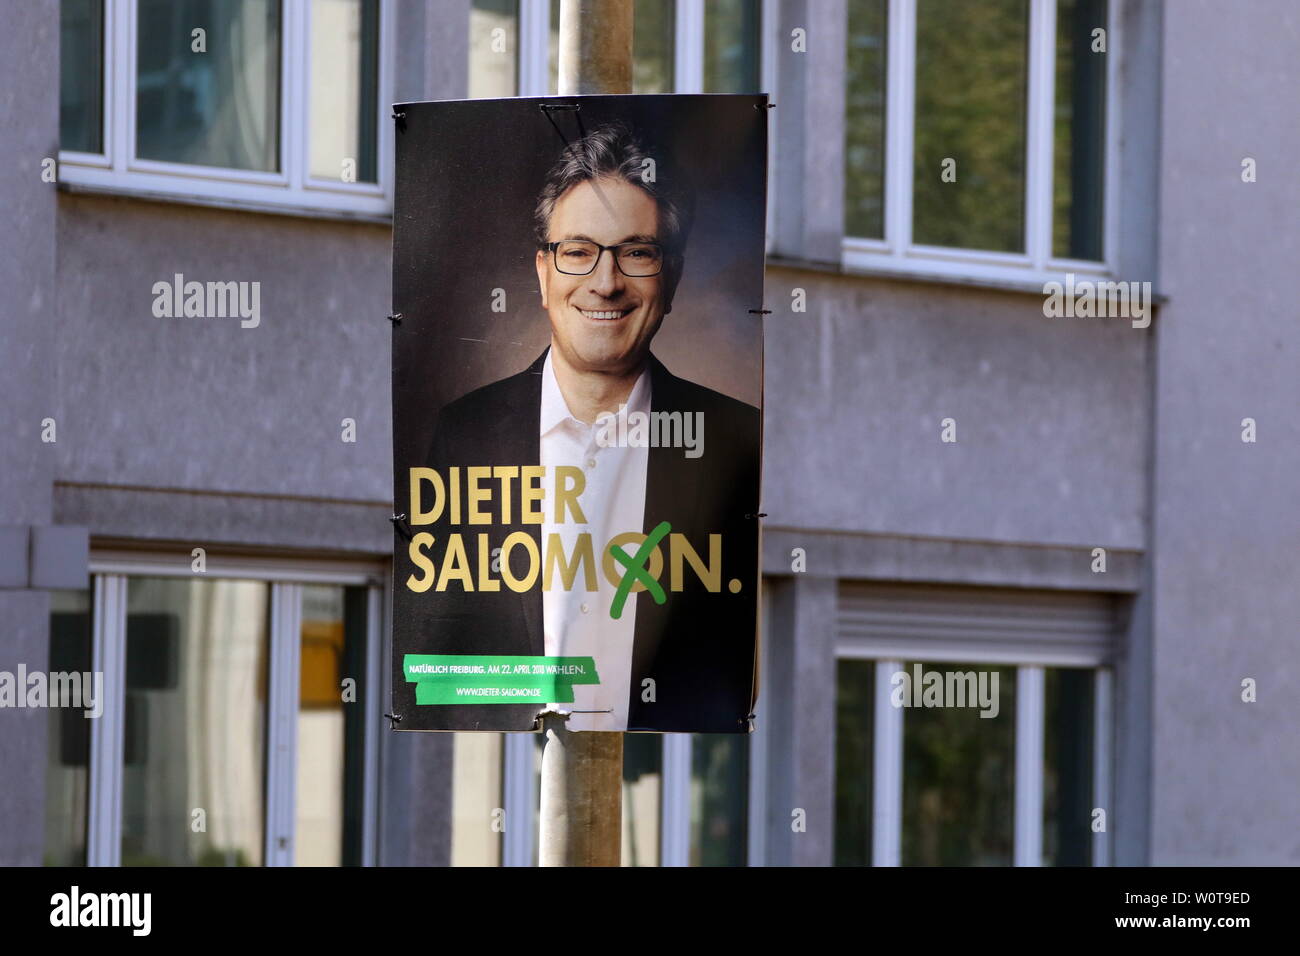 Dieter salomon hi-res stock photography and images - Alamy